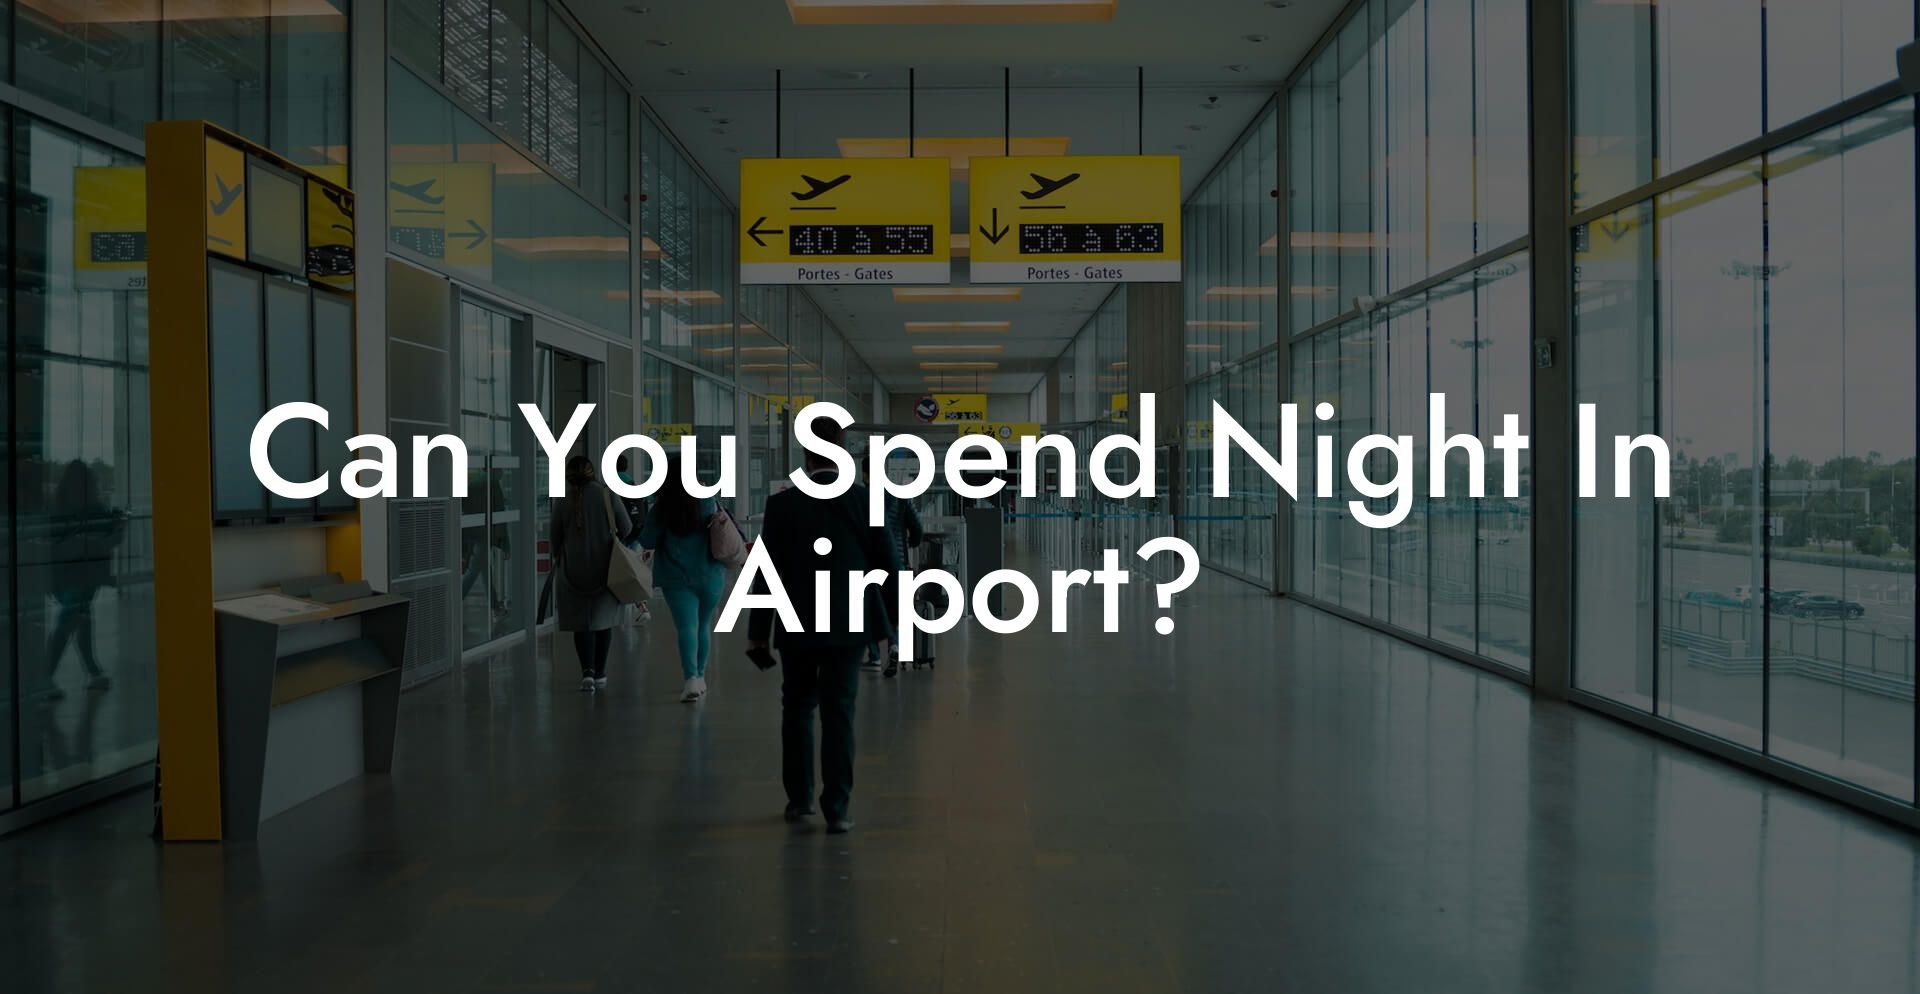 Can You Spend Night In Airport?